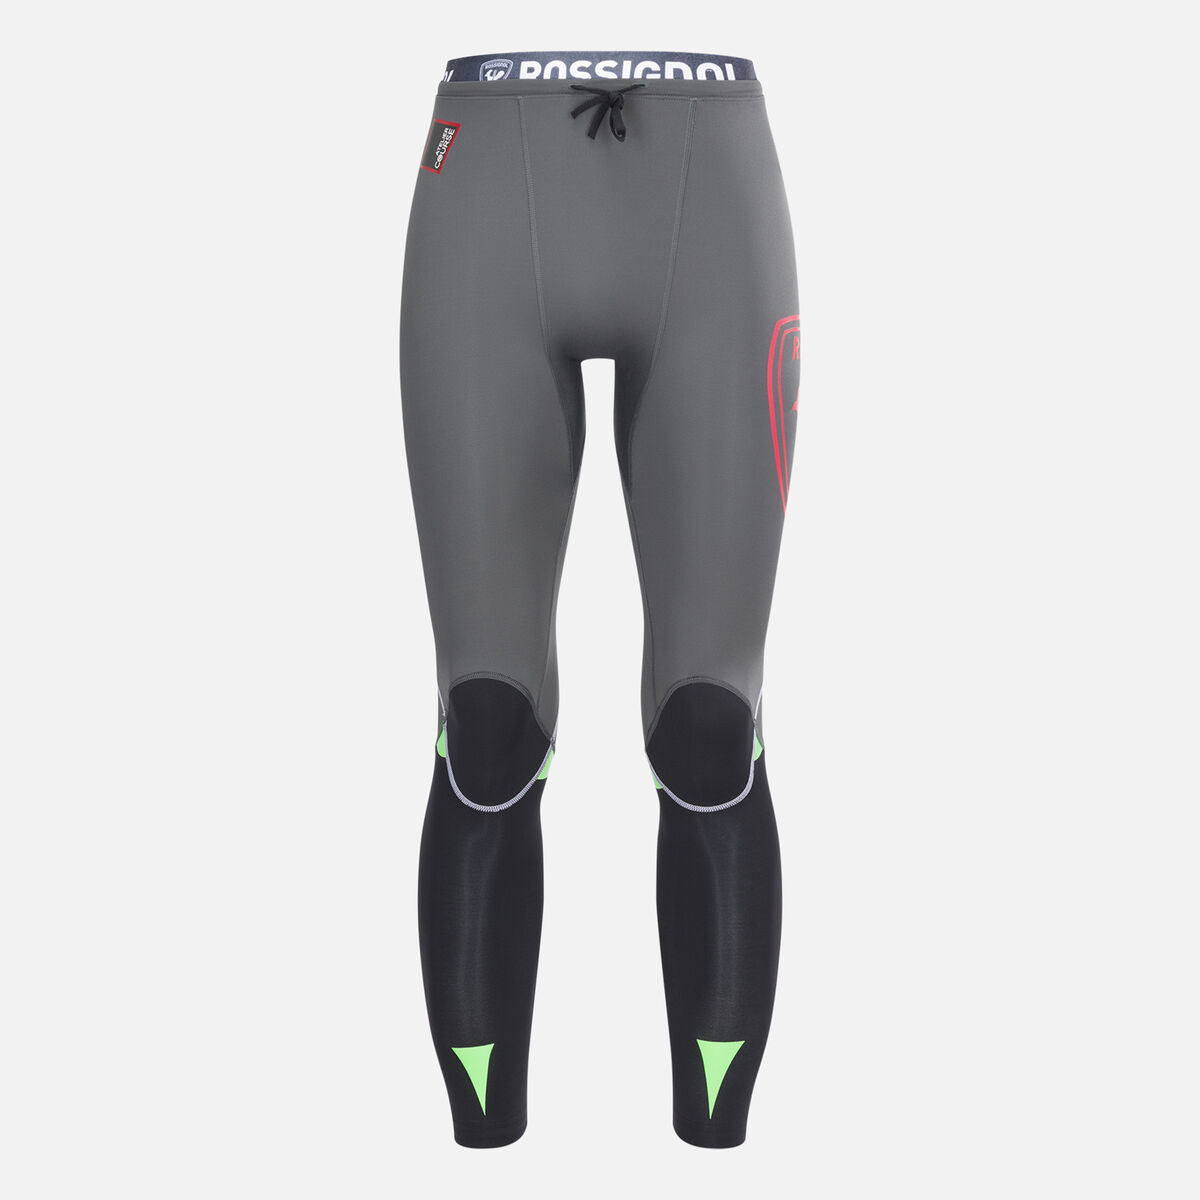 Rossignol - Infini Compression Race Tights - Running trousers - Men's